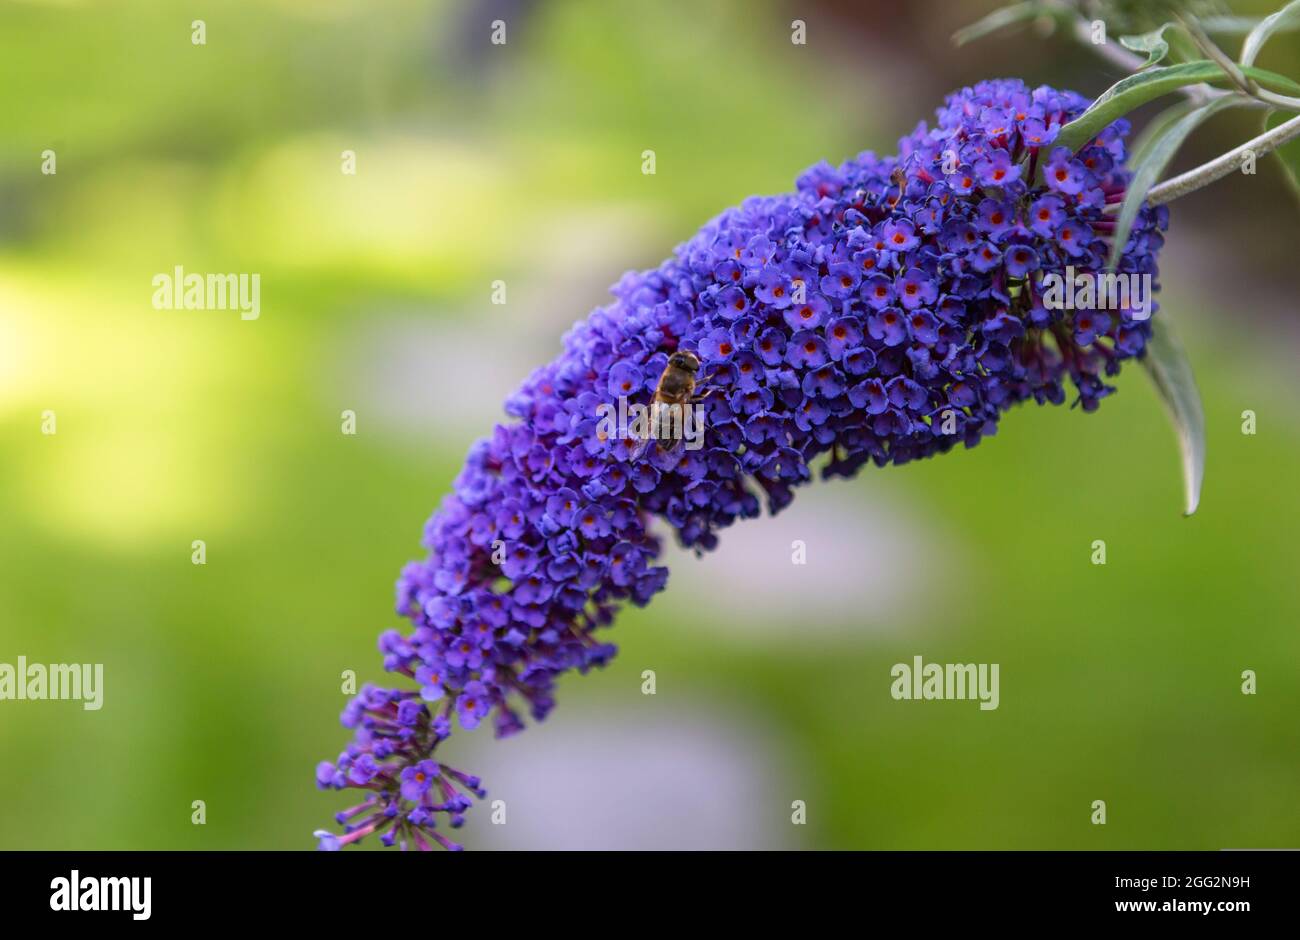 Image shows a bee on a purple Licac flower Stock Photo